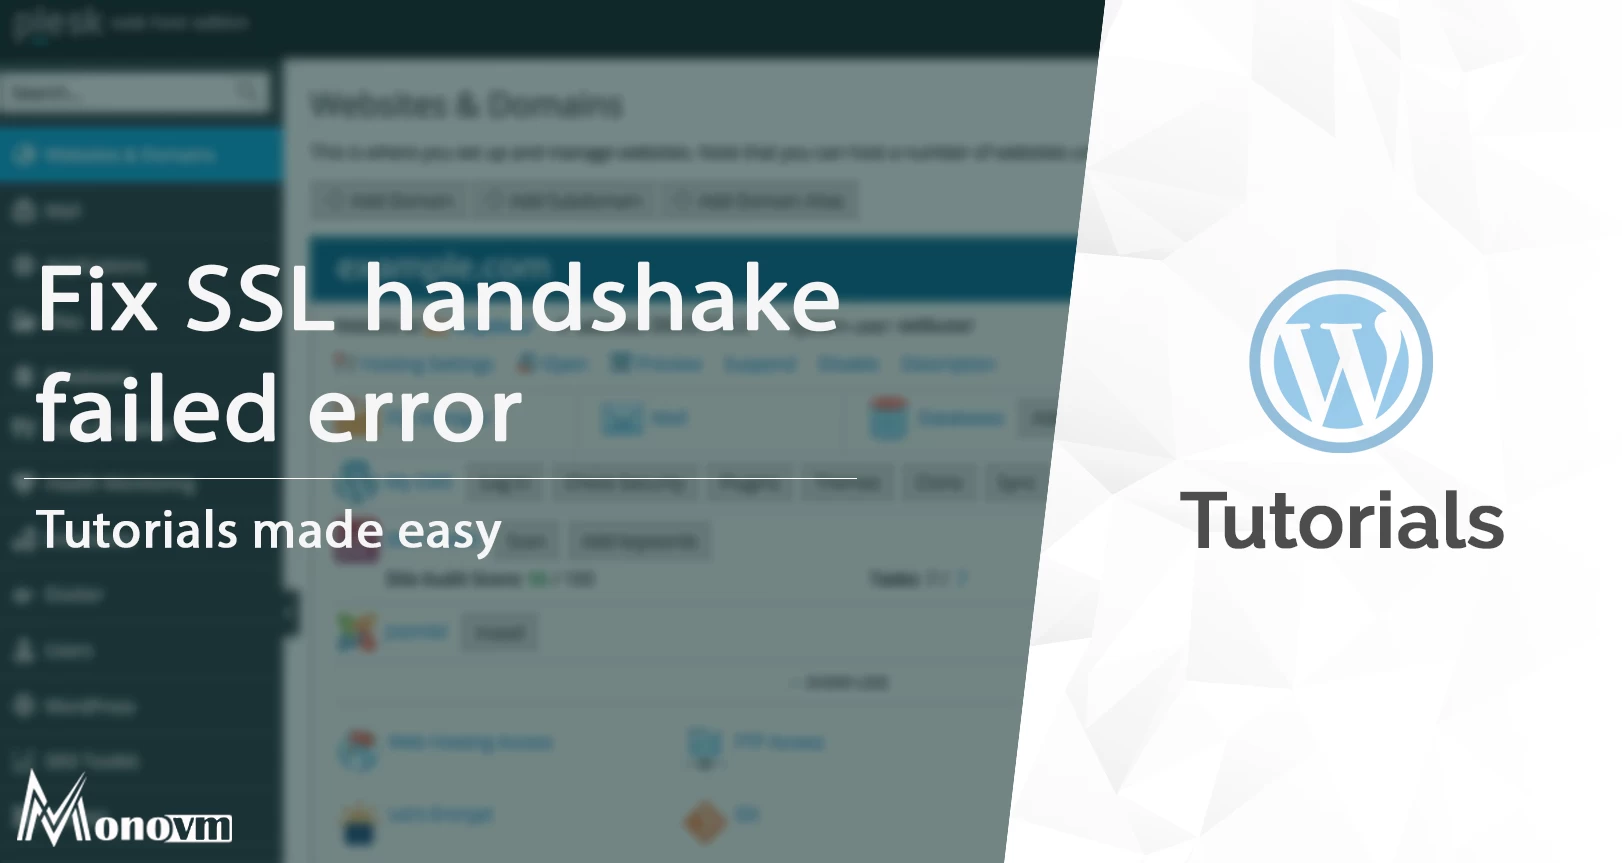 How to fix "SSL handshake failed error"? What is it?